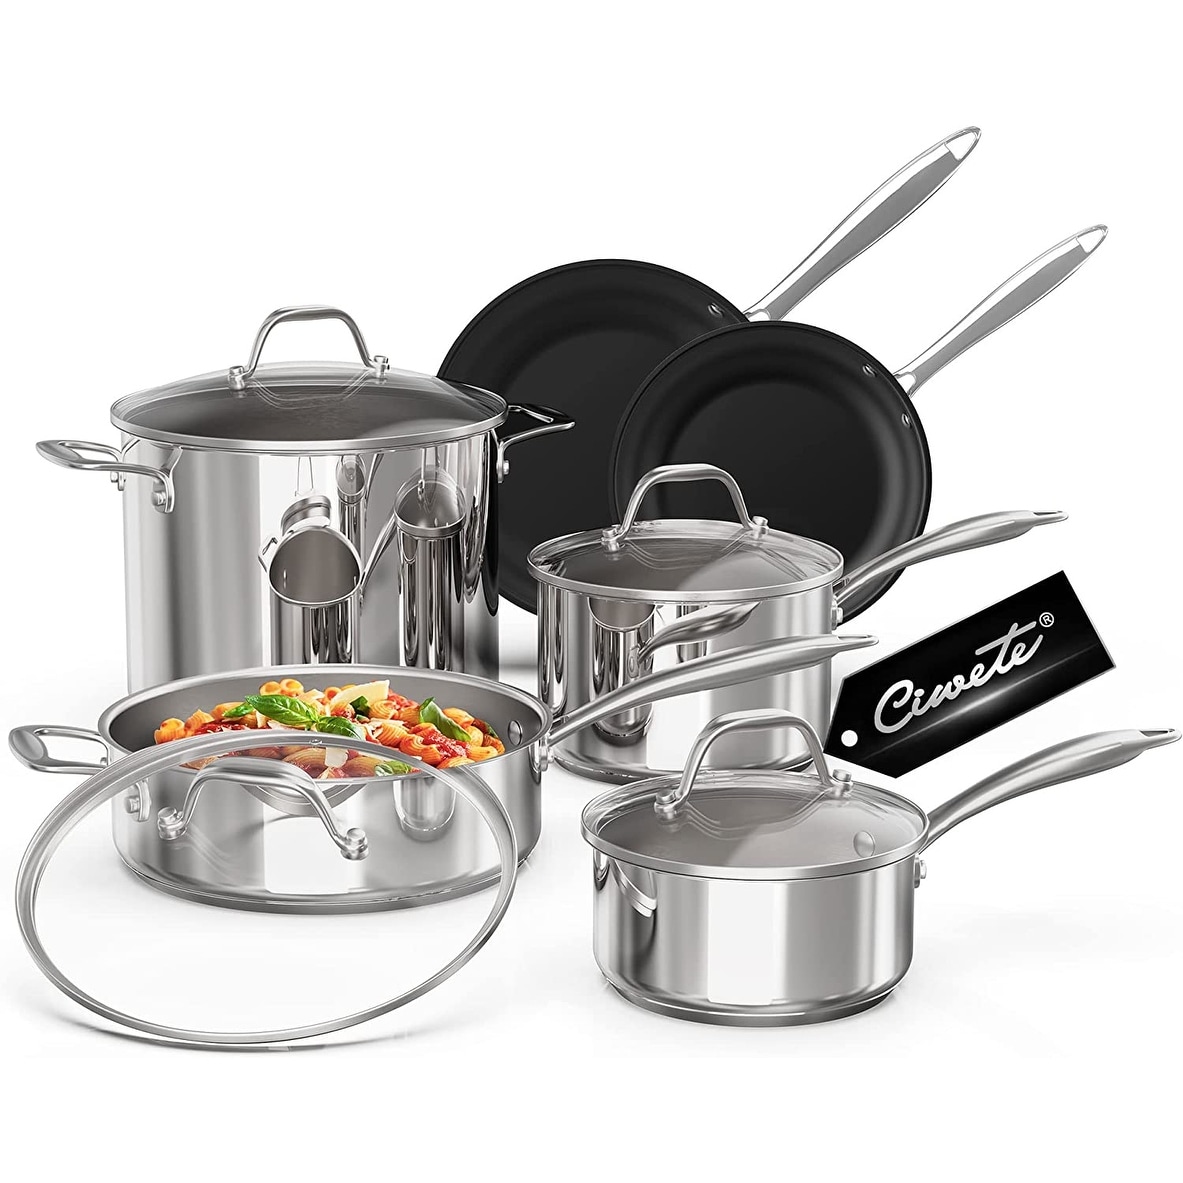 https://ak1.ostkcdn.com/images/products/is/images/direct/ee0a86f8893e9a33444abef71b73e034d7130d7d/Stainless-Steel-Pots-and-Pans-Set-10-Piece%2C-Kitchen-Cookware-Set-with-Nonstick-Frying-Pans-and-Glass-Lids.jpg